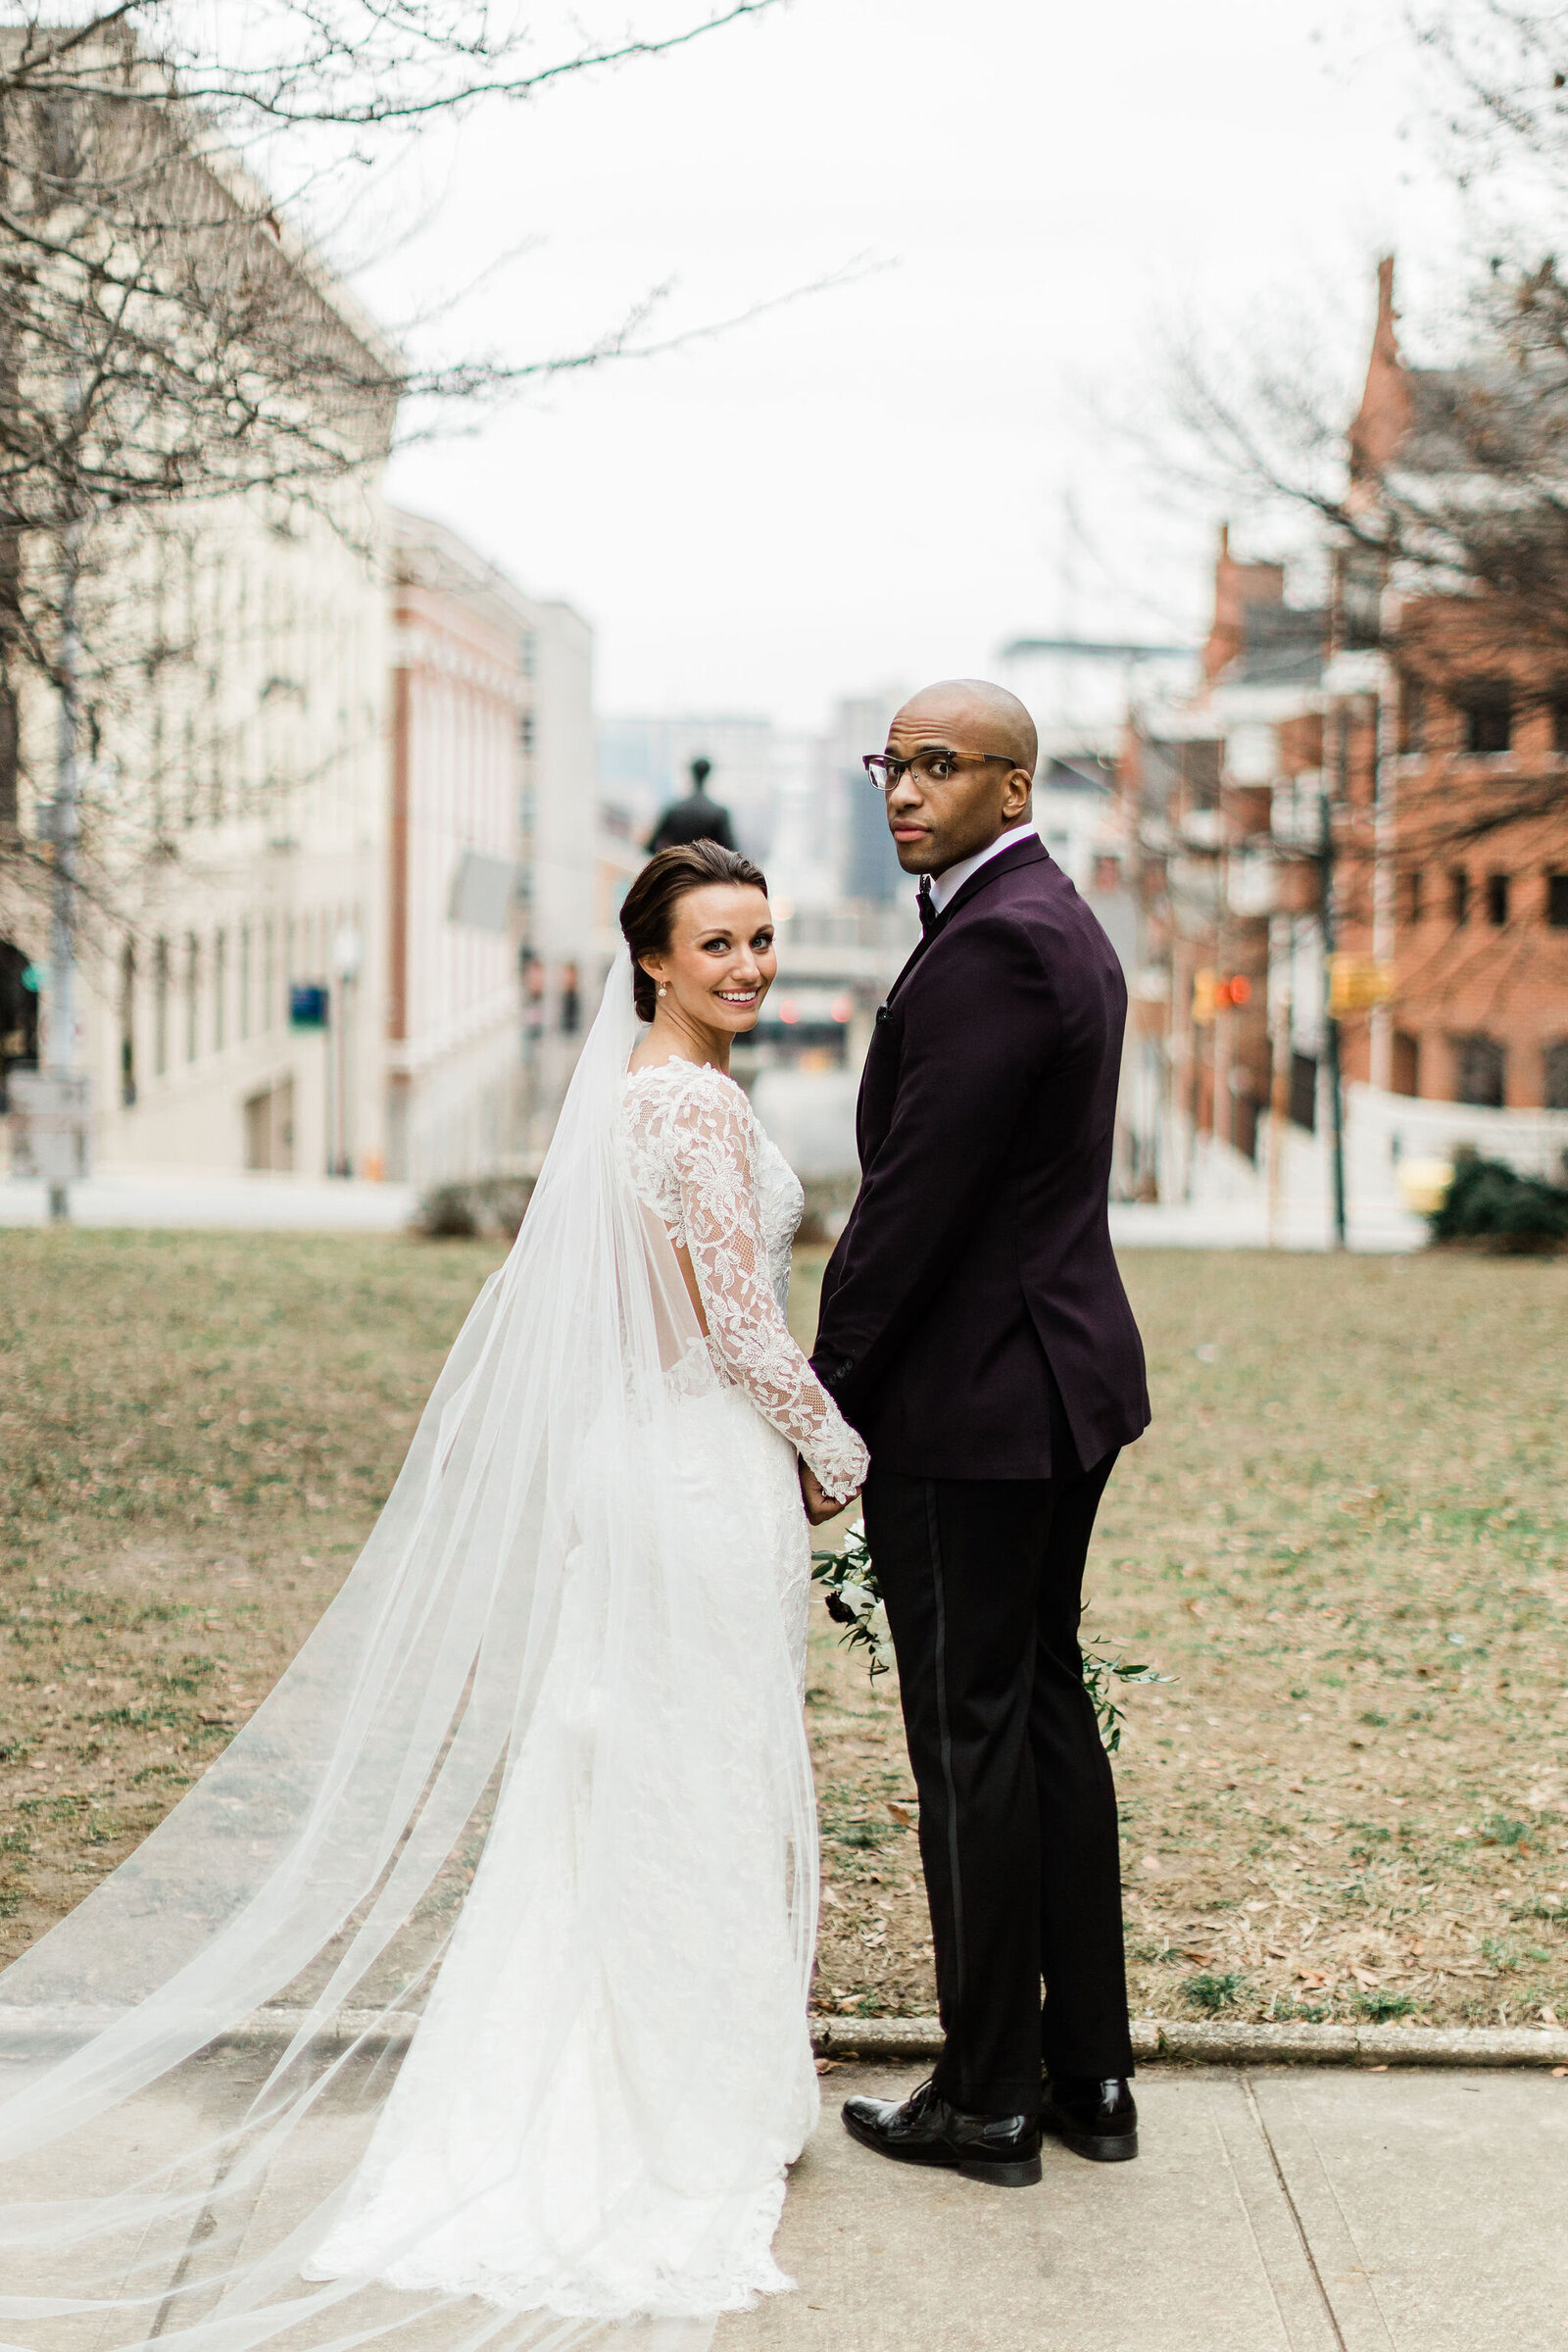 Formal Wedding Photos | The Peabody Library Baltimore MD | The Axtells Photo and Film